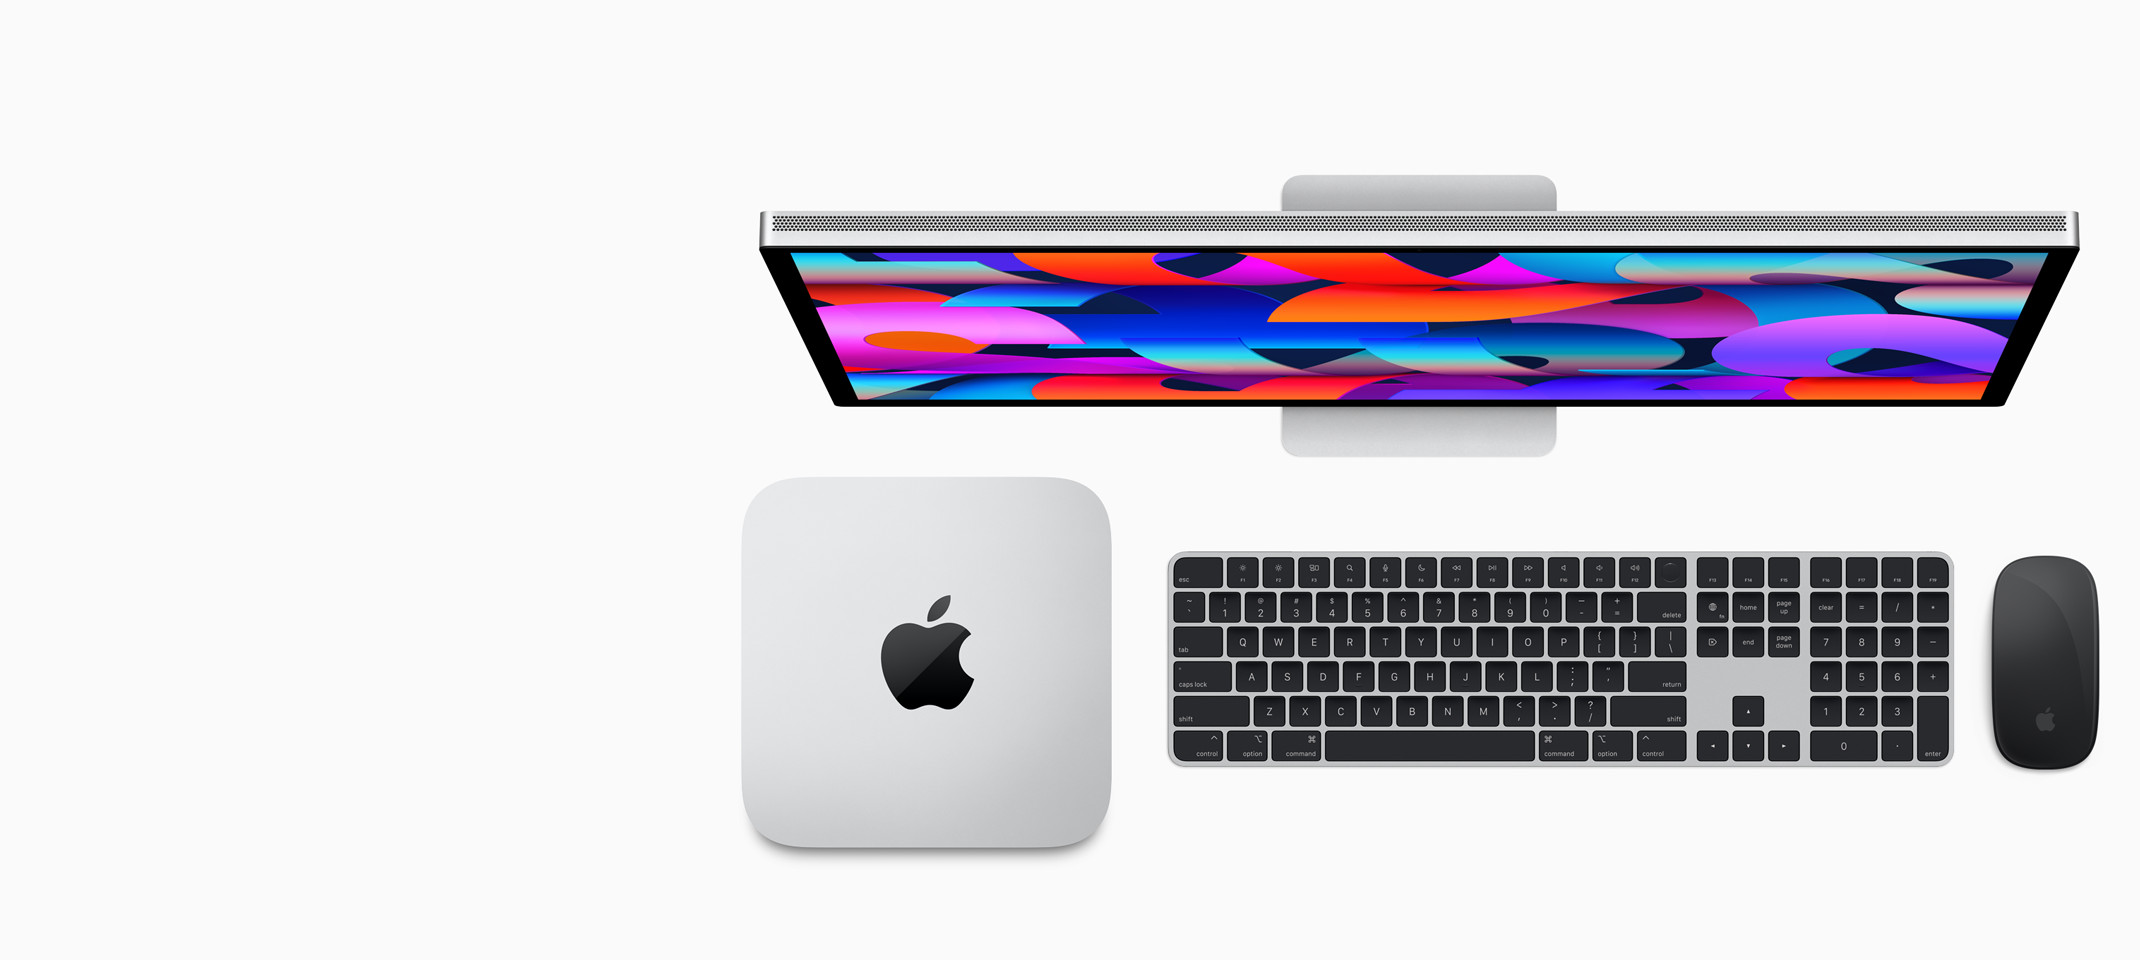 Studio Display, Mac Studio, Magic Keyboard with Touch ID and numeric keypad, and Magic Mouse